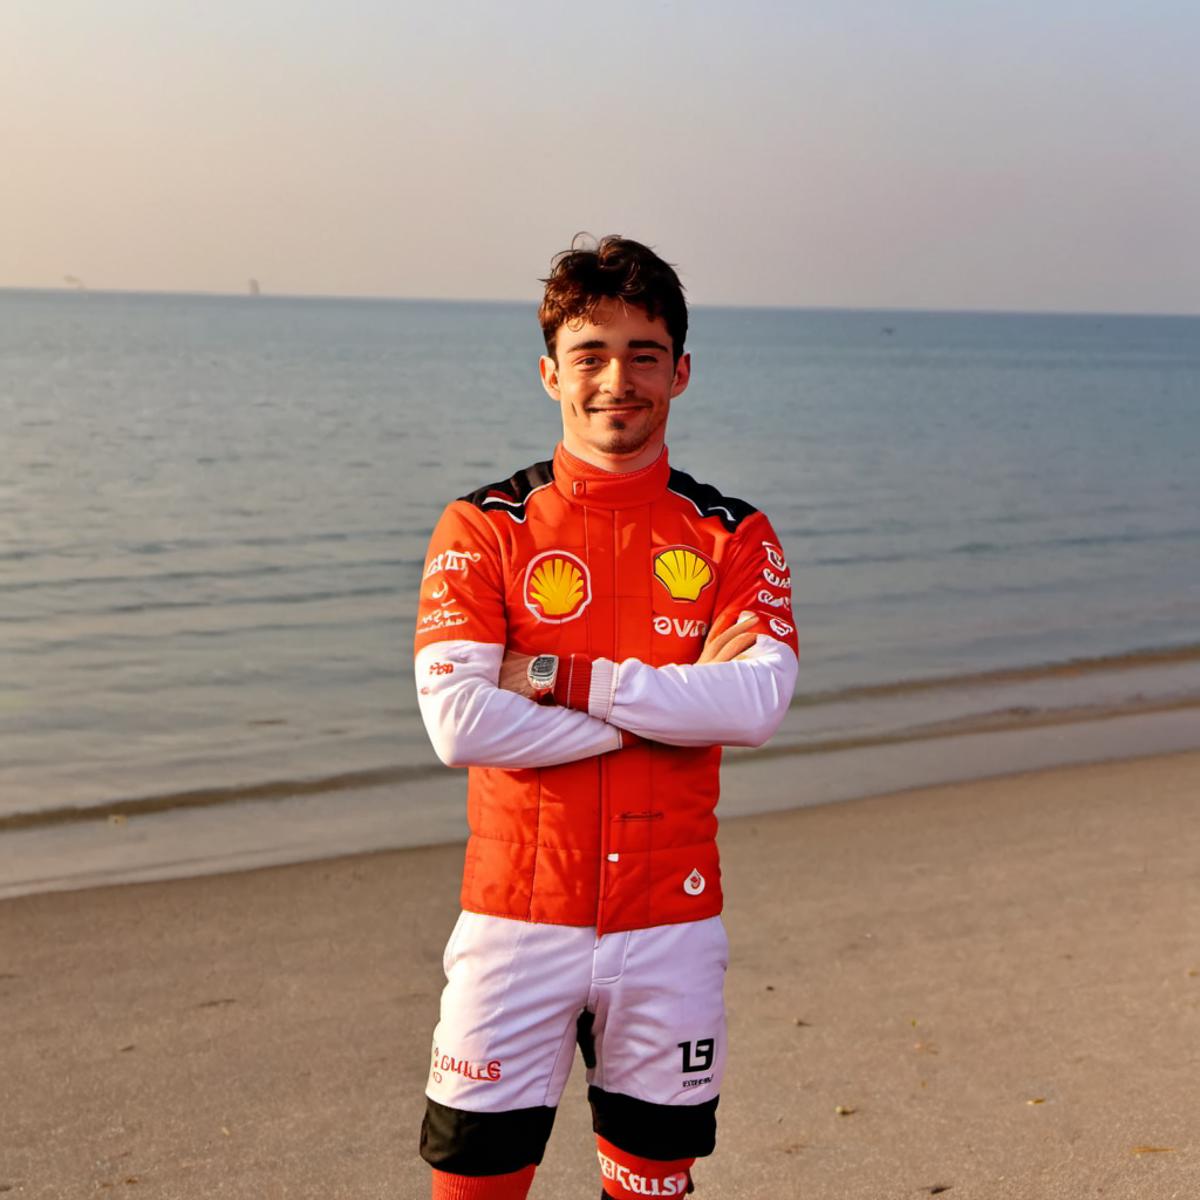 F1 Driver Charles Leclerc LORA image by realitywarp